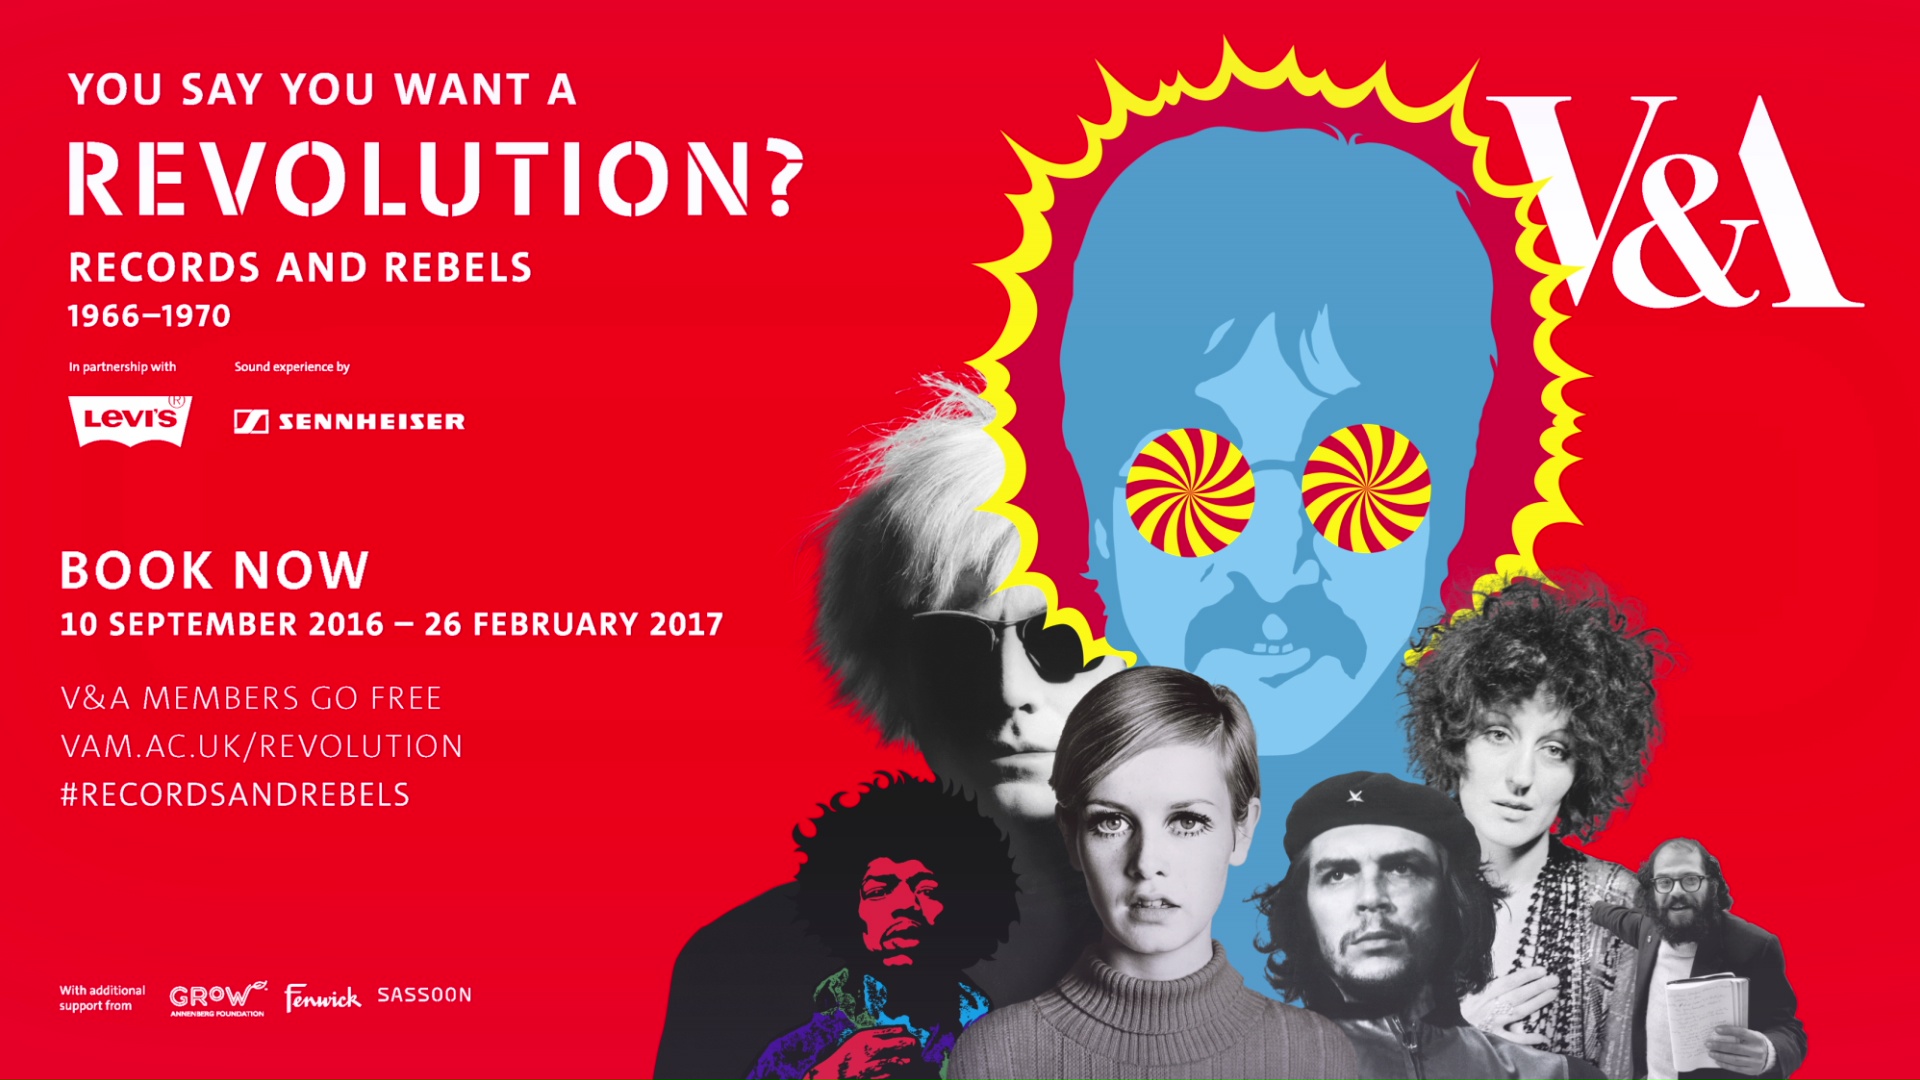 V&A: You Say You Want a Revolution?